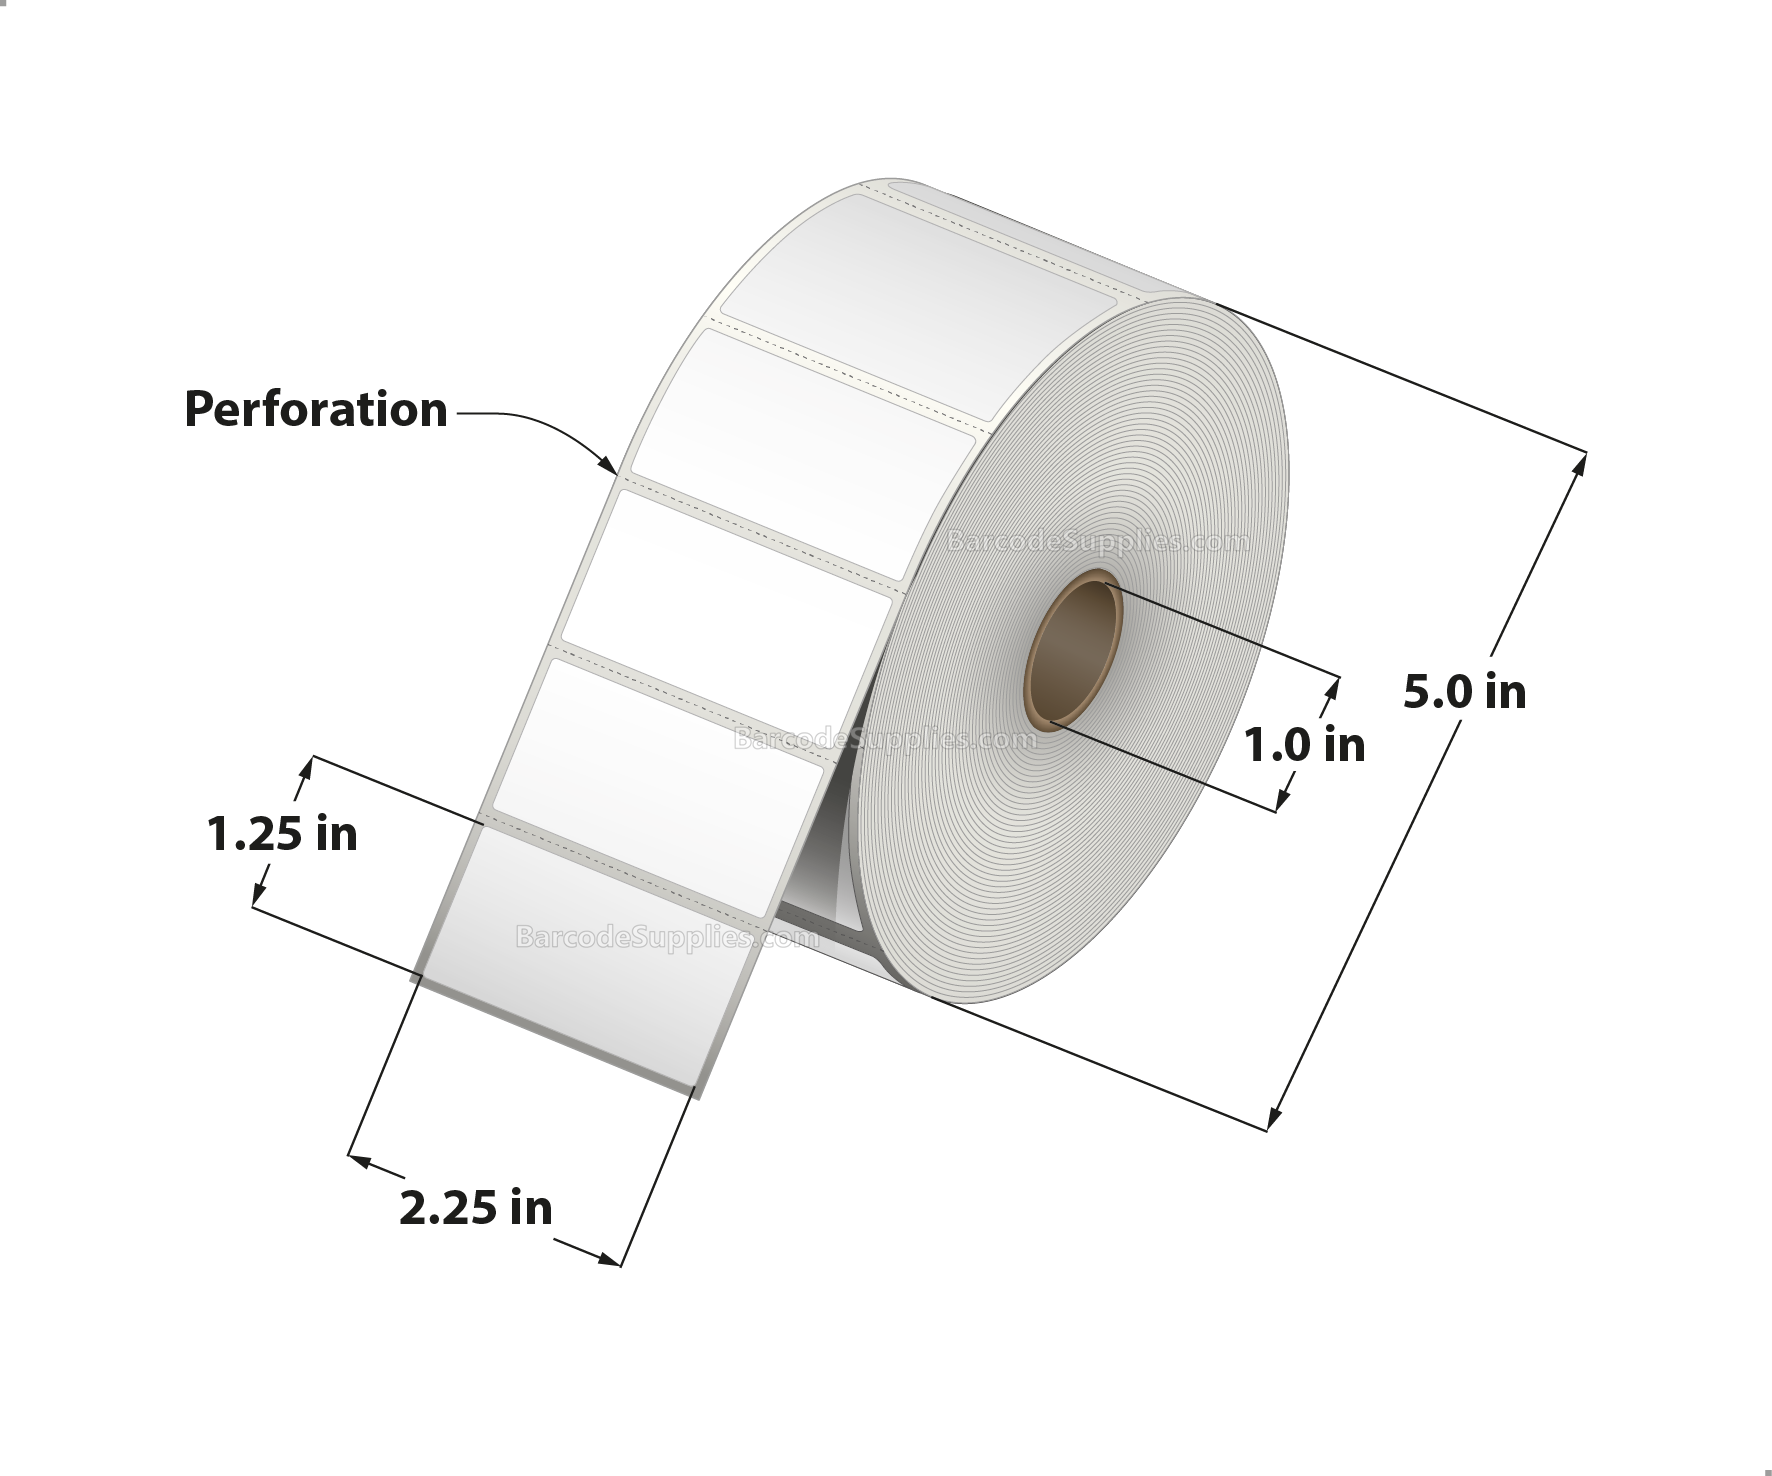 2.25 x 1.25 Direct Thermal White Labels With Permanent Acrylic Adhesive - Perforated - 1900 Labels Per Roll - Carton Of 4 Rolls - 7600 Labels Total - MPN: DT225125-15PDT